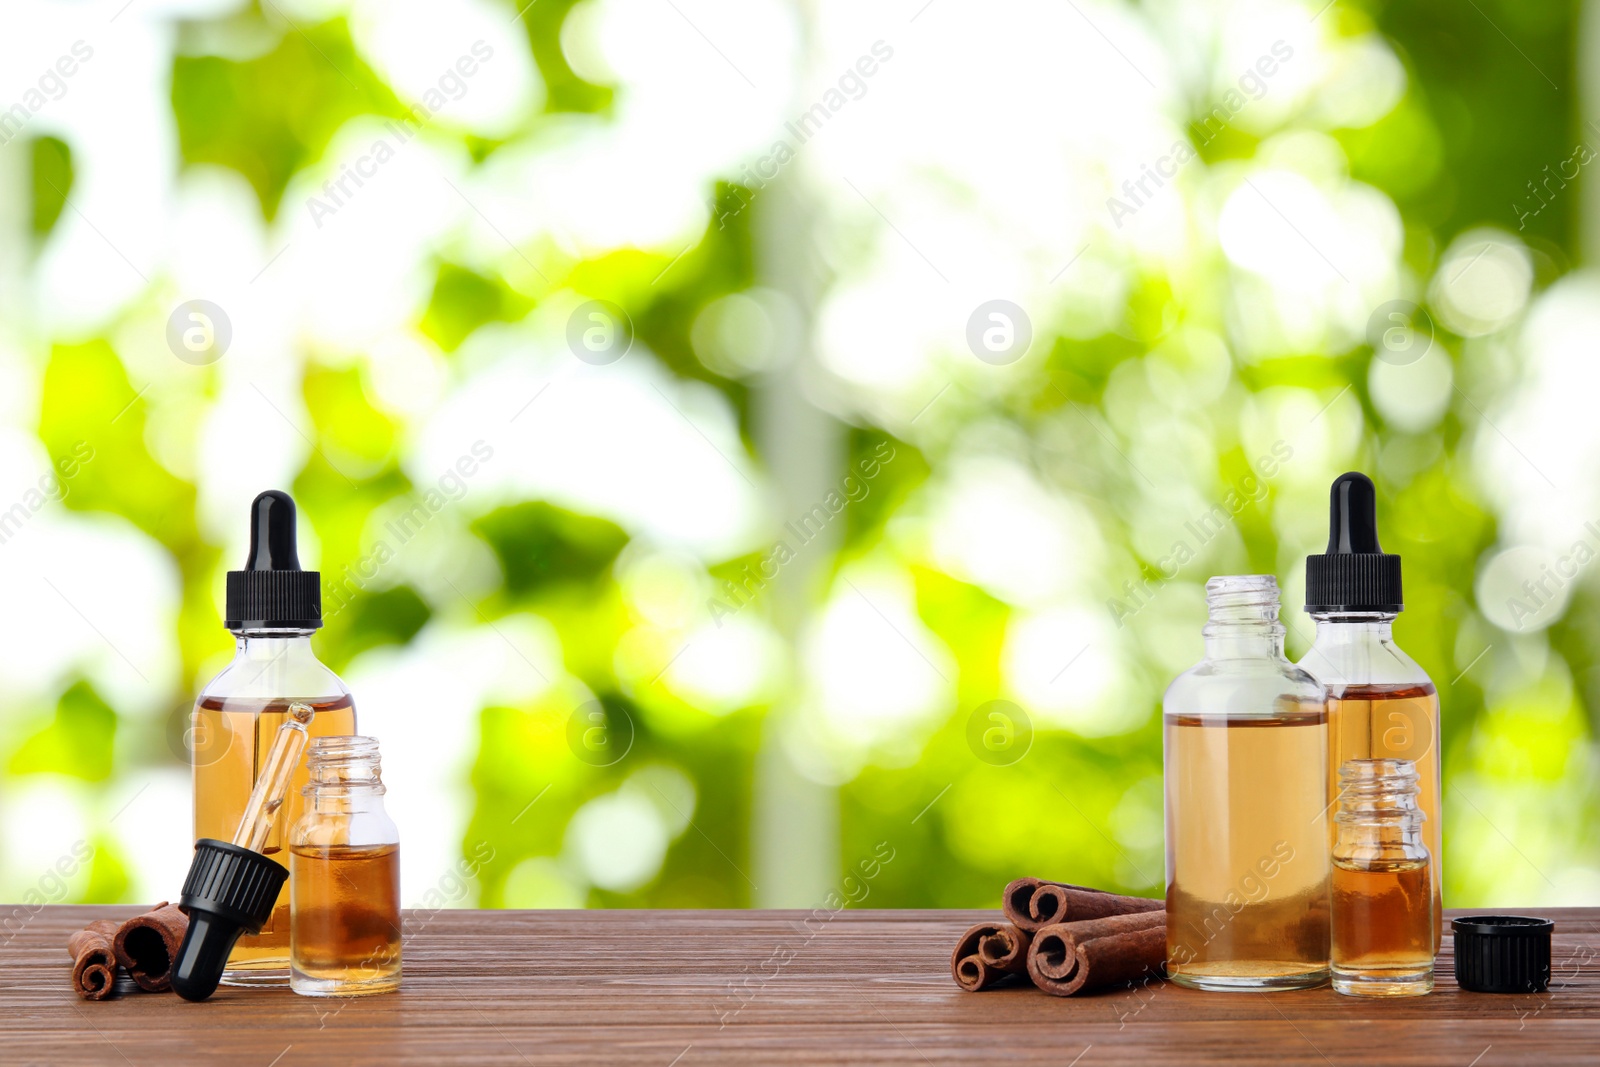 Image of Bottles of essential oil and cinnamon sticks on wooden table against blurred background. Space for text